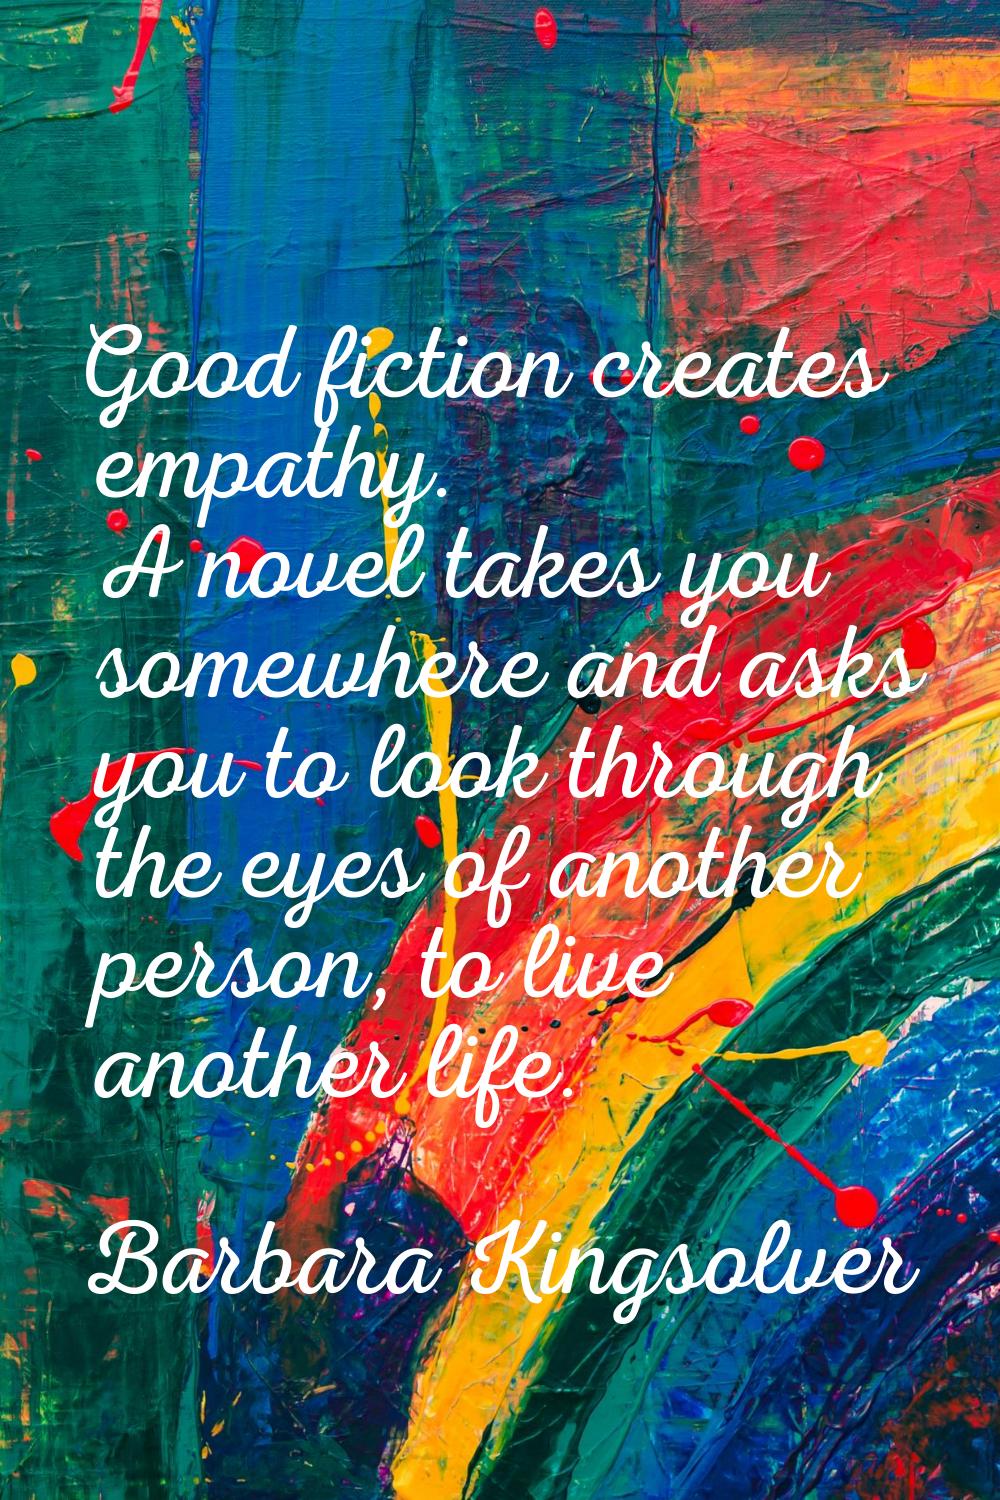 Good fiction creates empathy. A novel takes you somewhere and asks you to look through the eyes of 